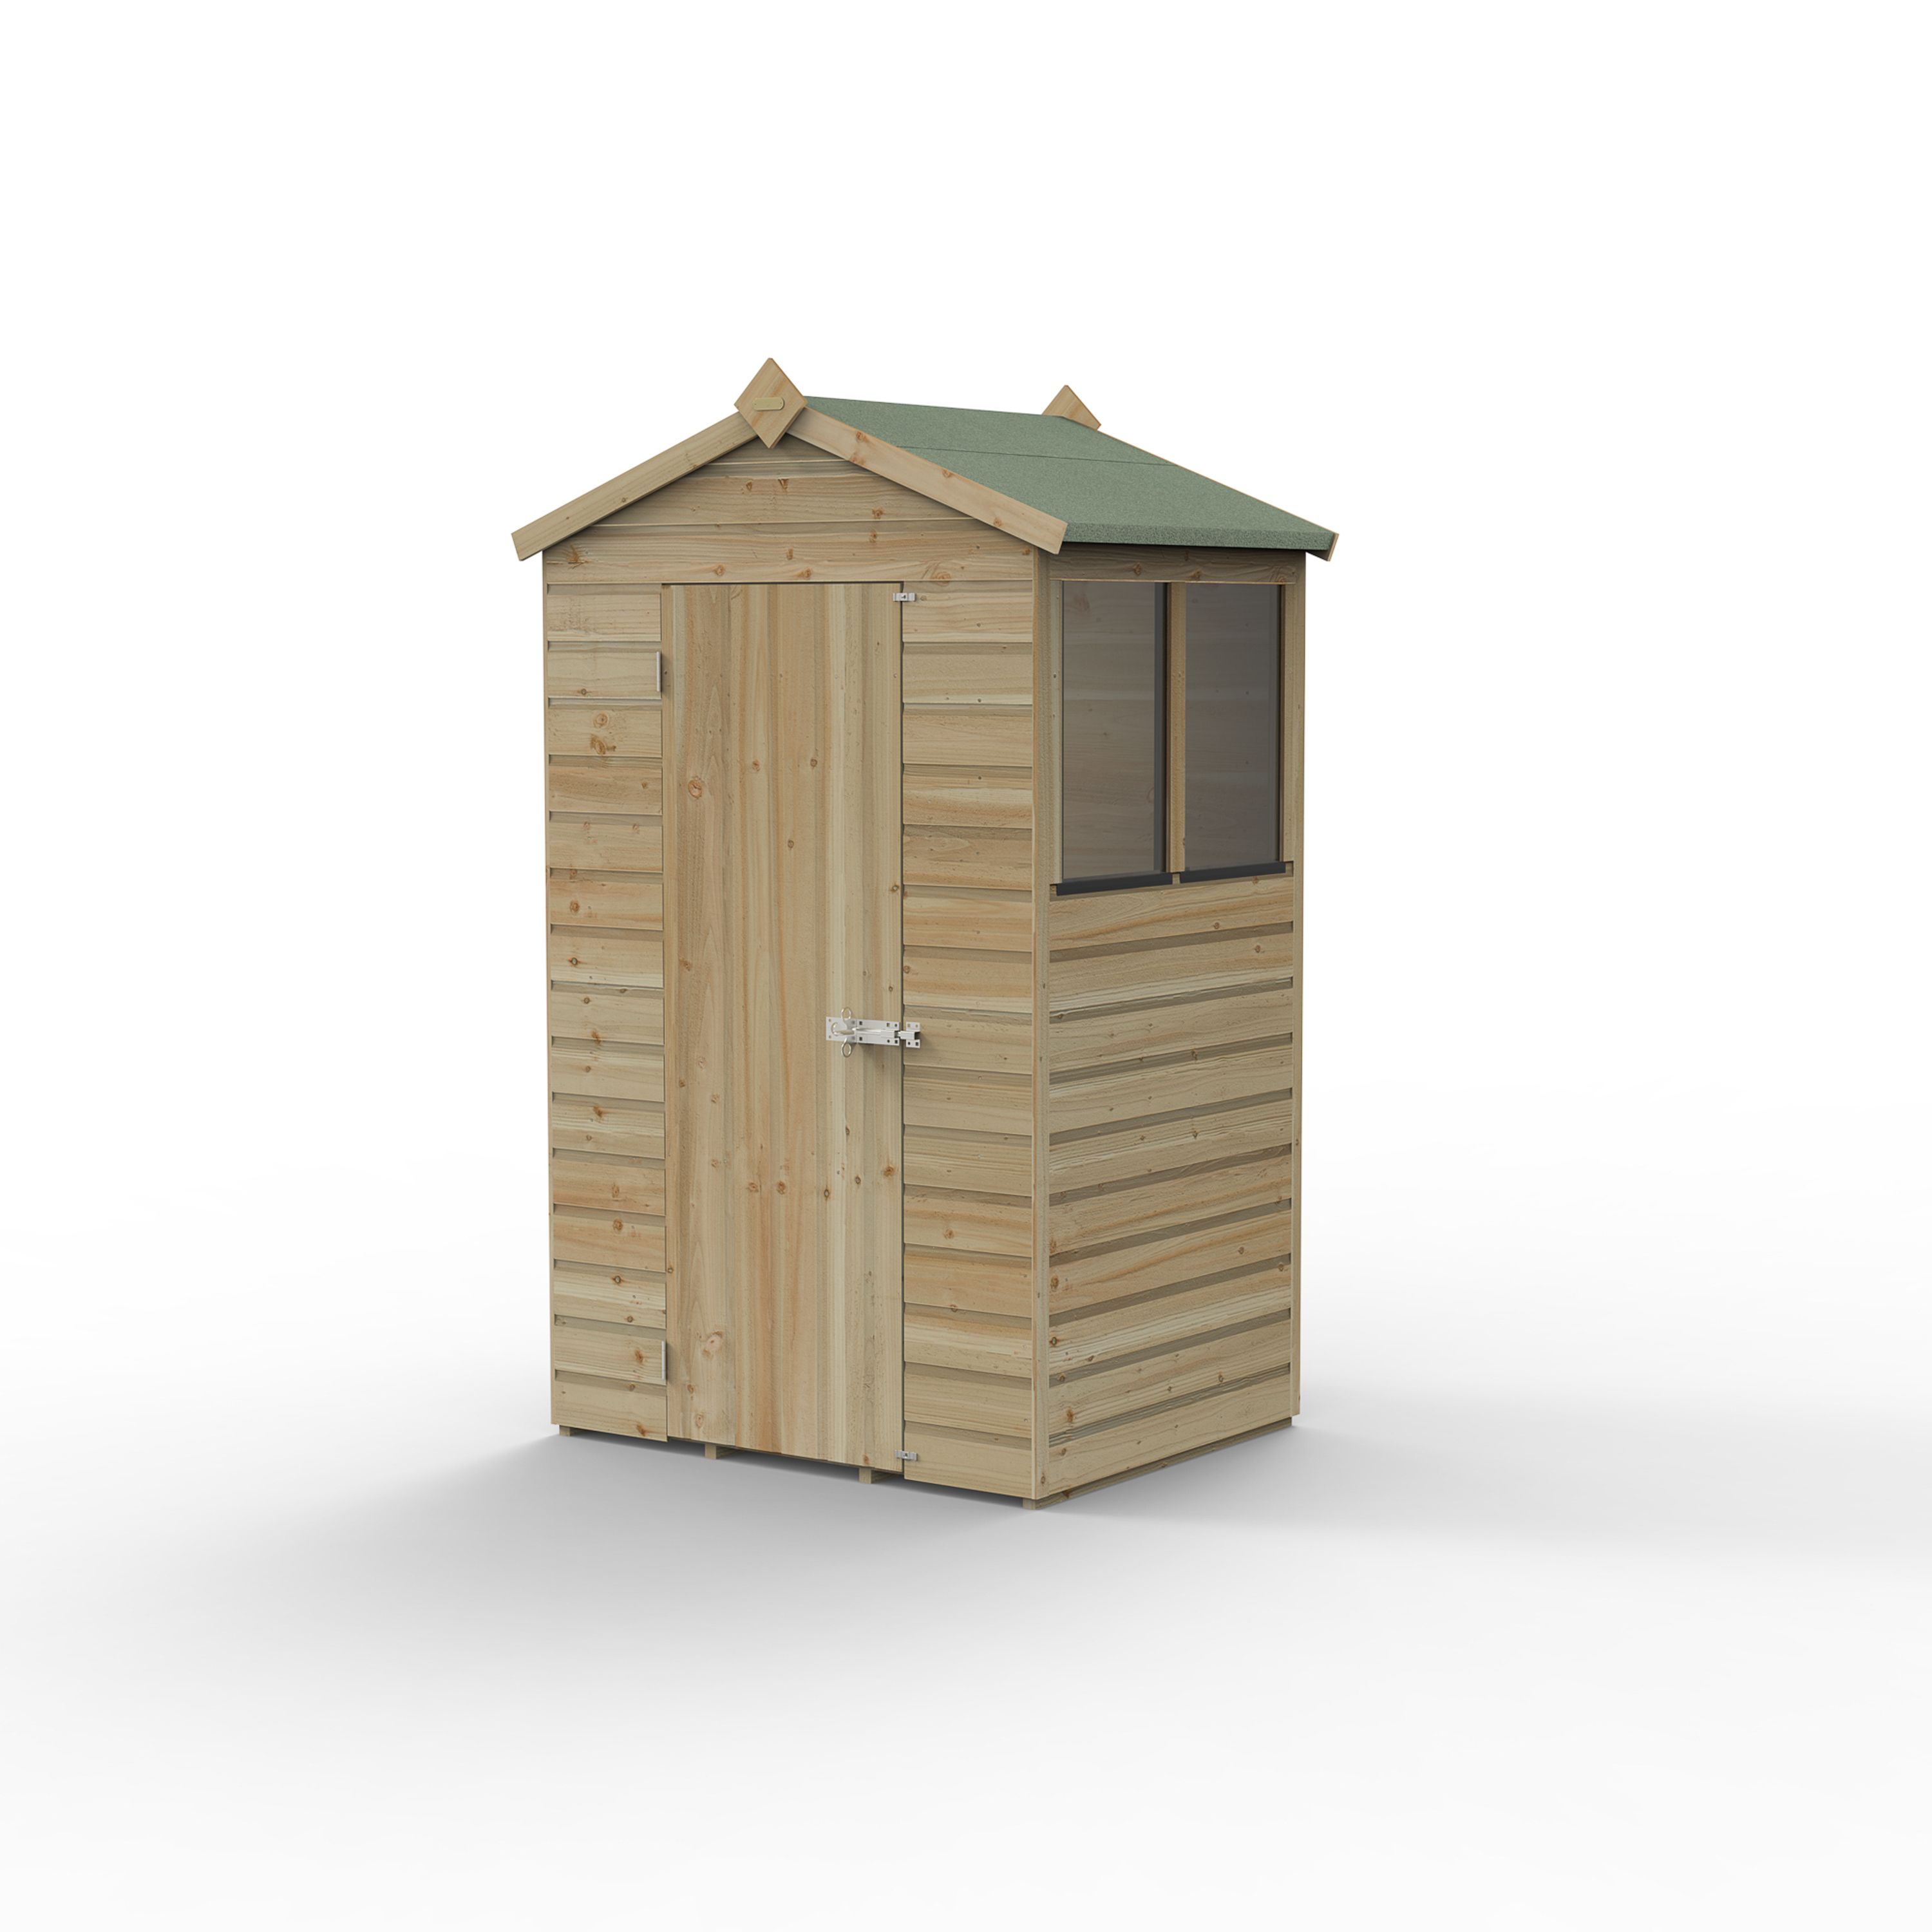 Forest Garden Beckwood 4x3 ft Apex Natural timber Wooden Shed with floor & 2 windows - Assembly not required